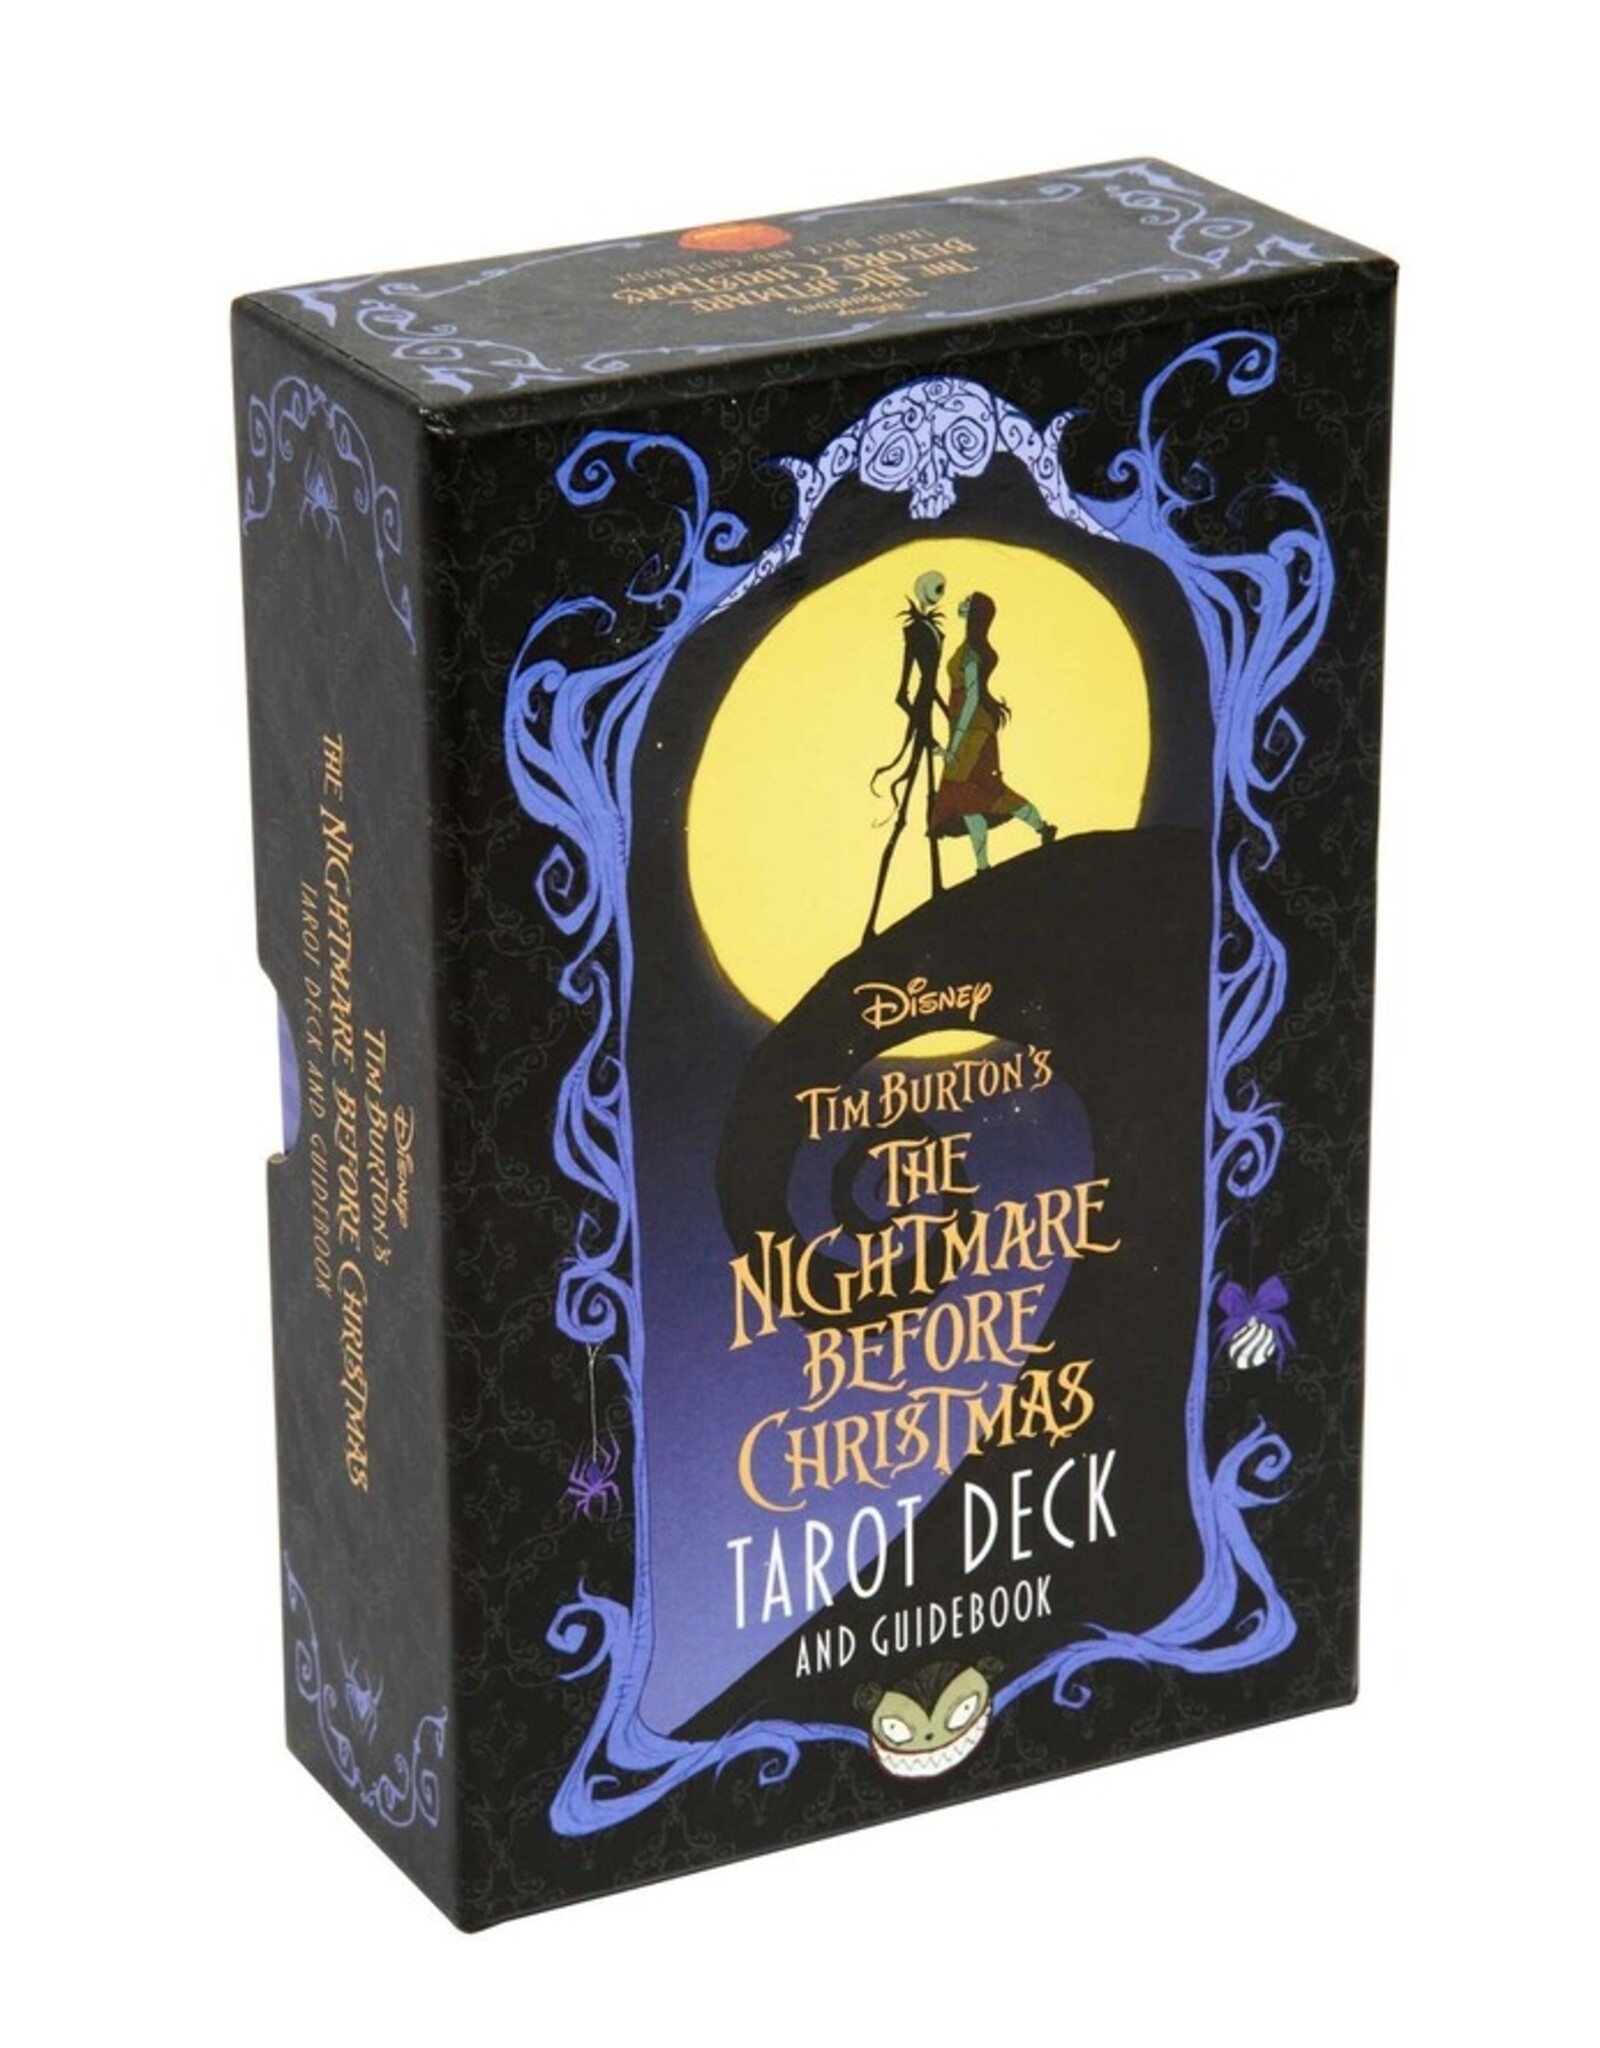 Simon & Schuster The Nightmare Before Christmas Tarot Deck and Guidebook